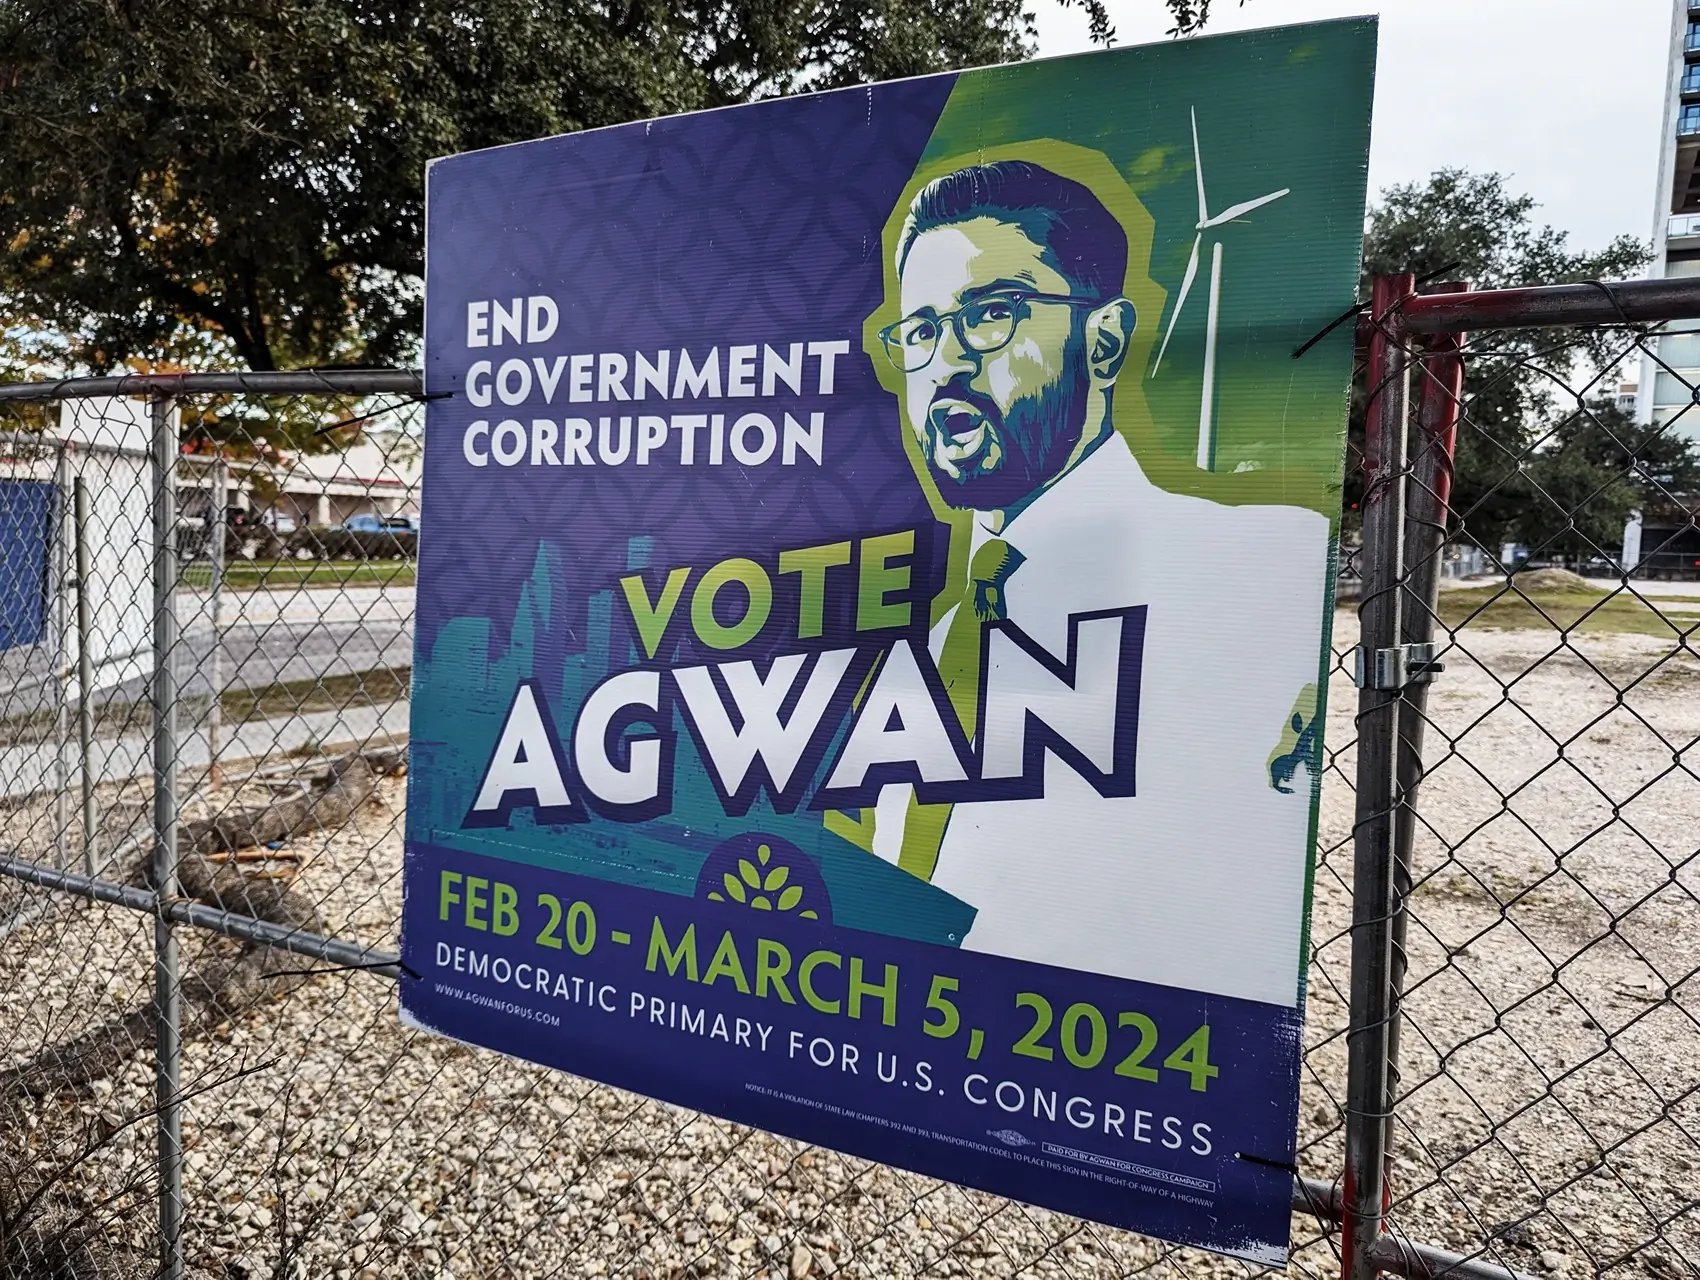 A campaign sign for congressional candidate Pervez Agwan in Houston. A former campaign worker sued Agwan alleging he sexually assaulted her.